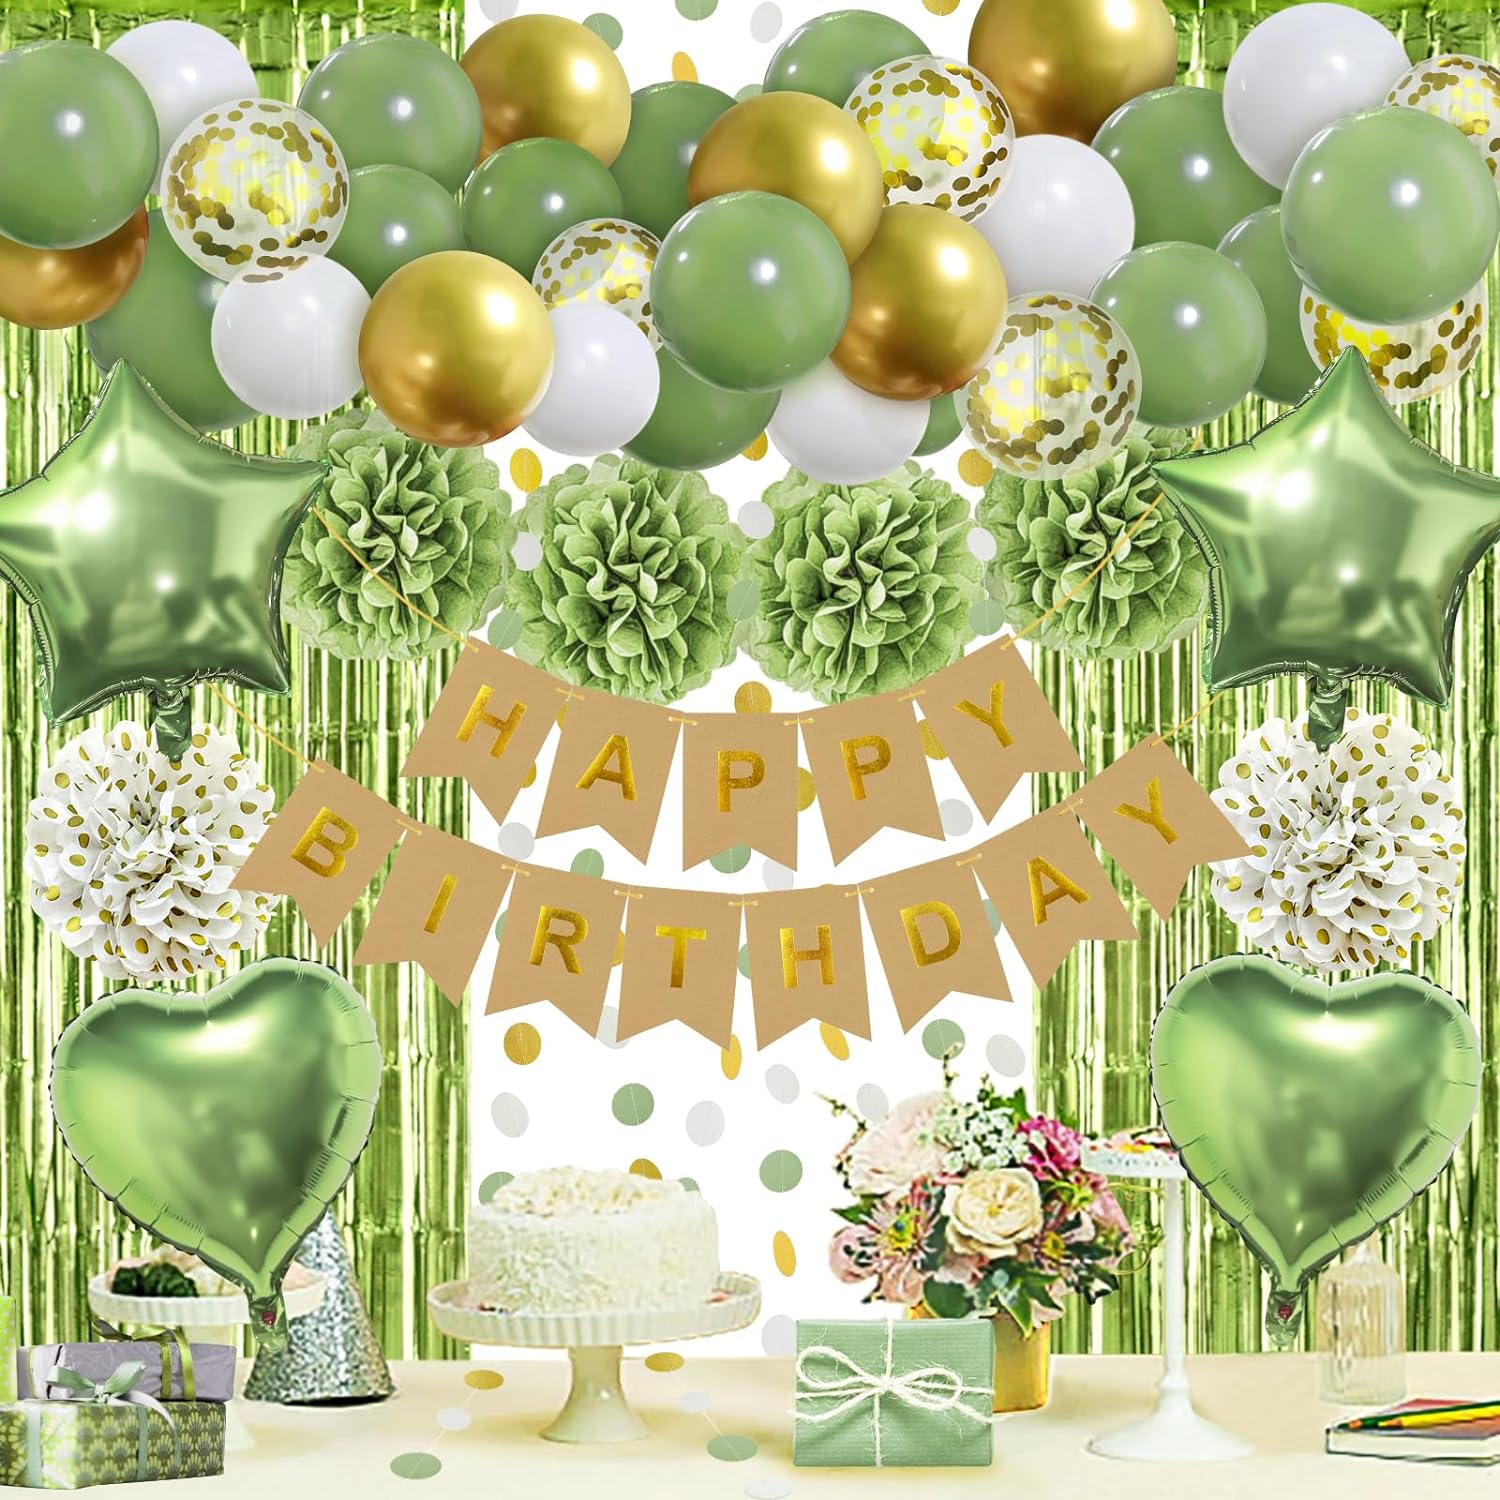 ZERODECO Sage Green Birthday Party Decorations, Olive Green Gold Pompoms Balloons Happy Birthday Banner Neutral Rustic Boho Blush Safari Botanical Greenery Dcor for Baby Girls Women Birthday Party